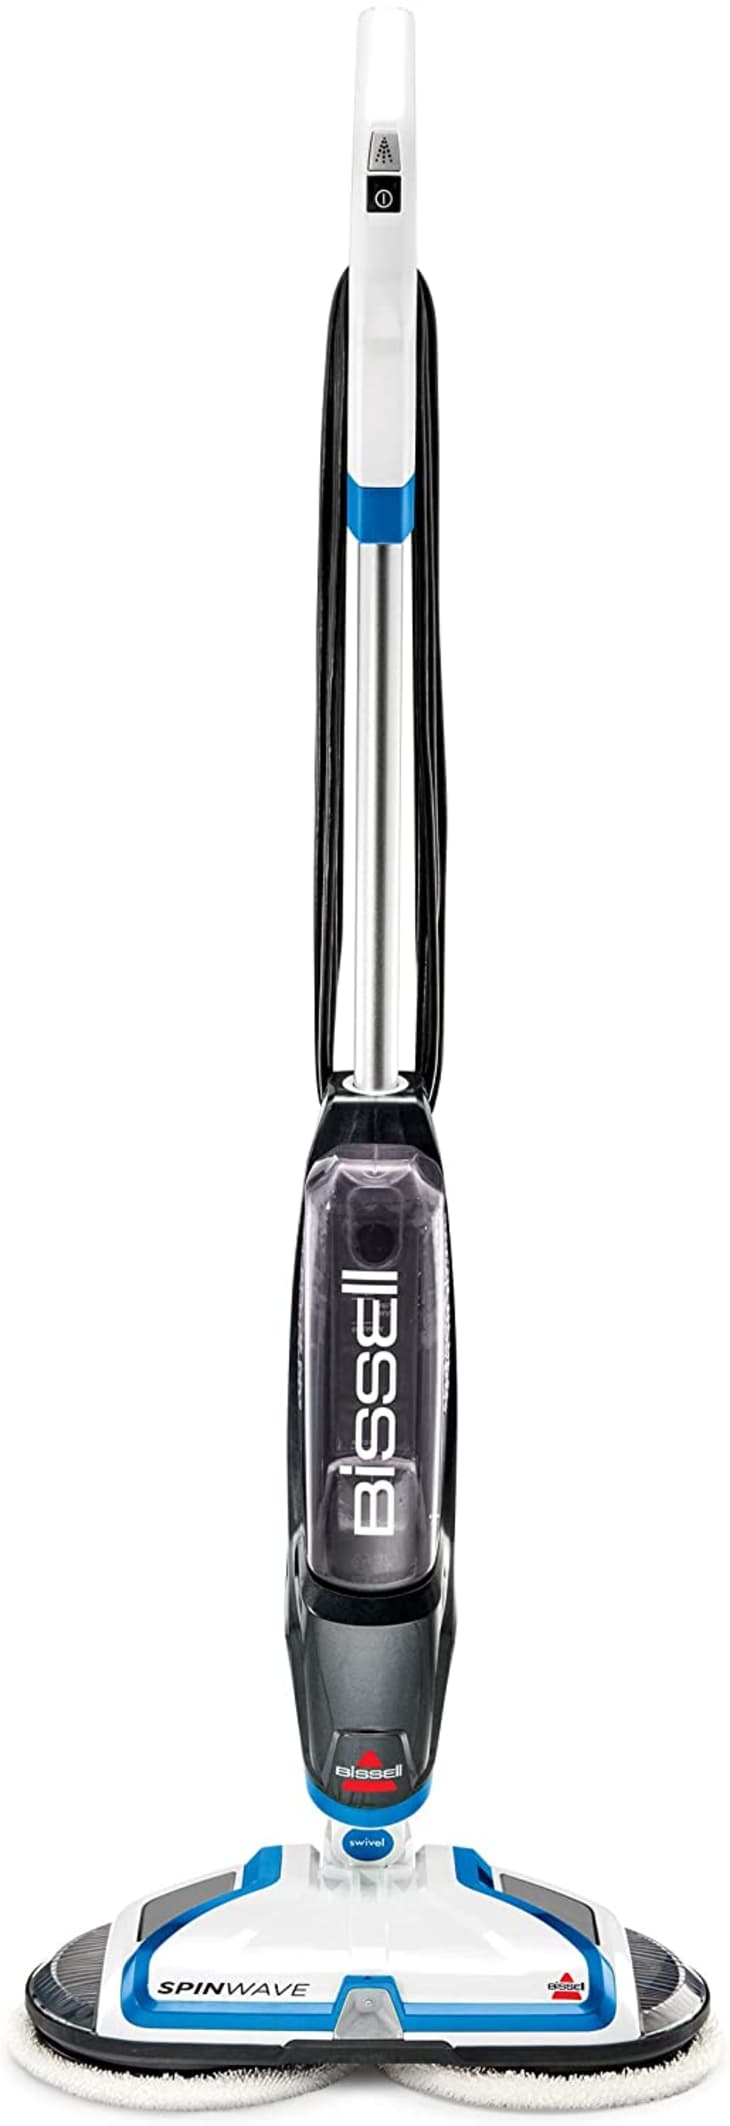 Bissell SpinWave Expert Hard Floor Spin Mop at Amazon